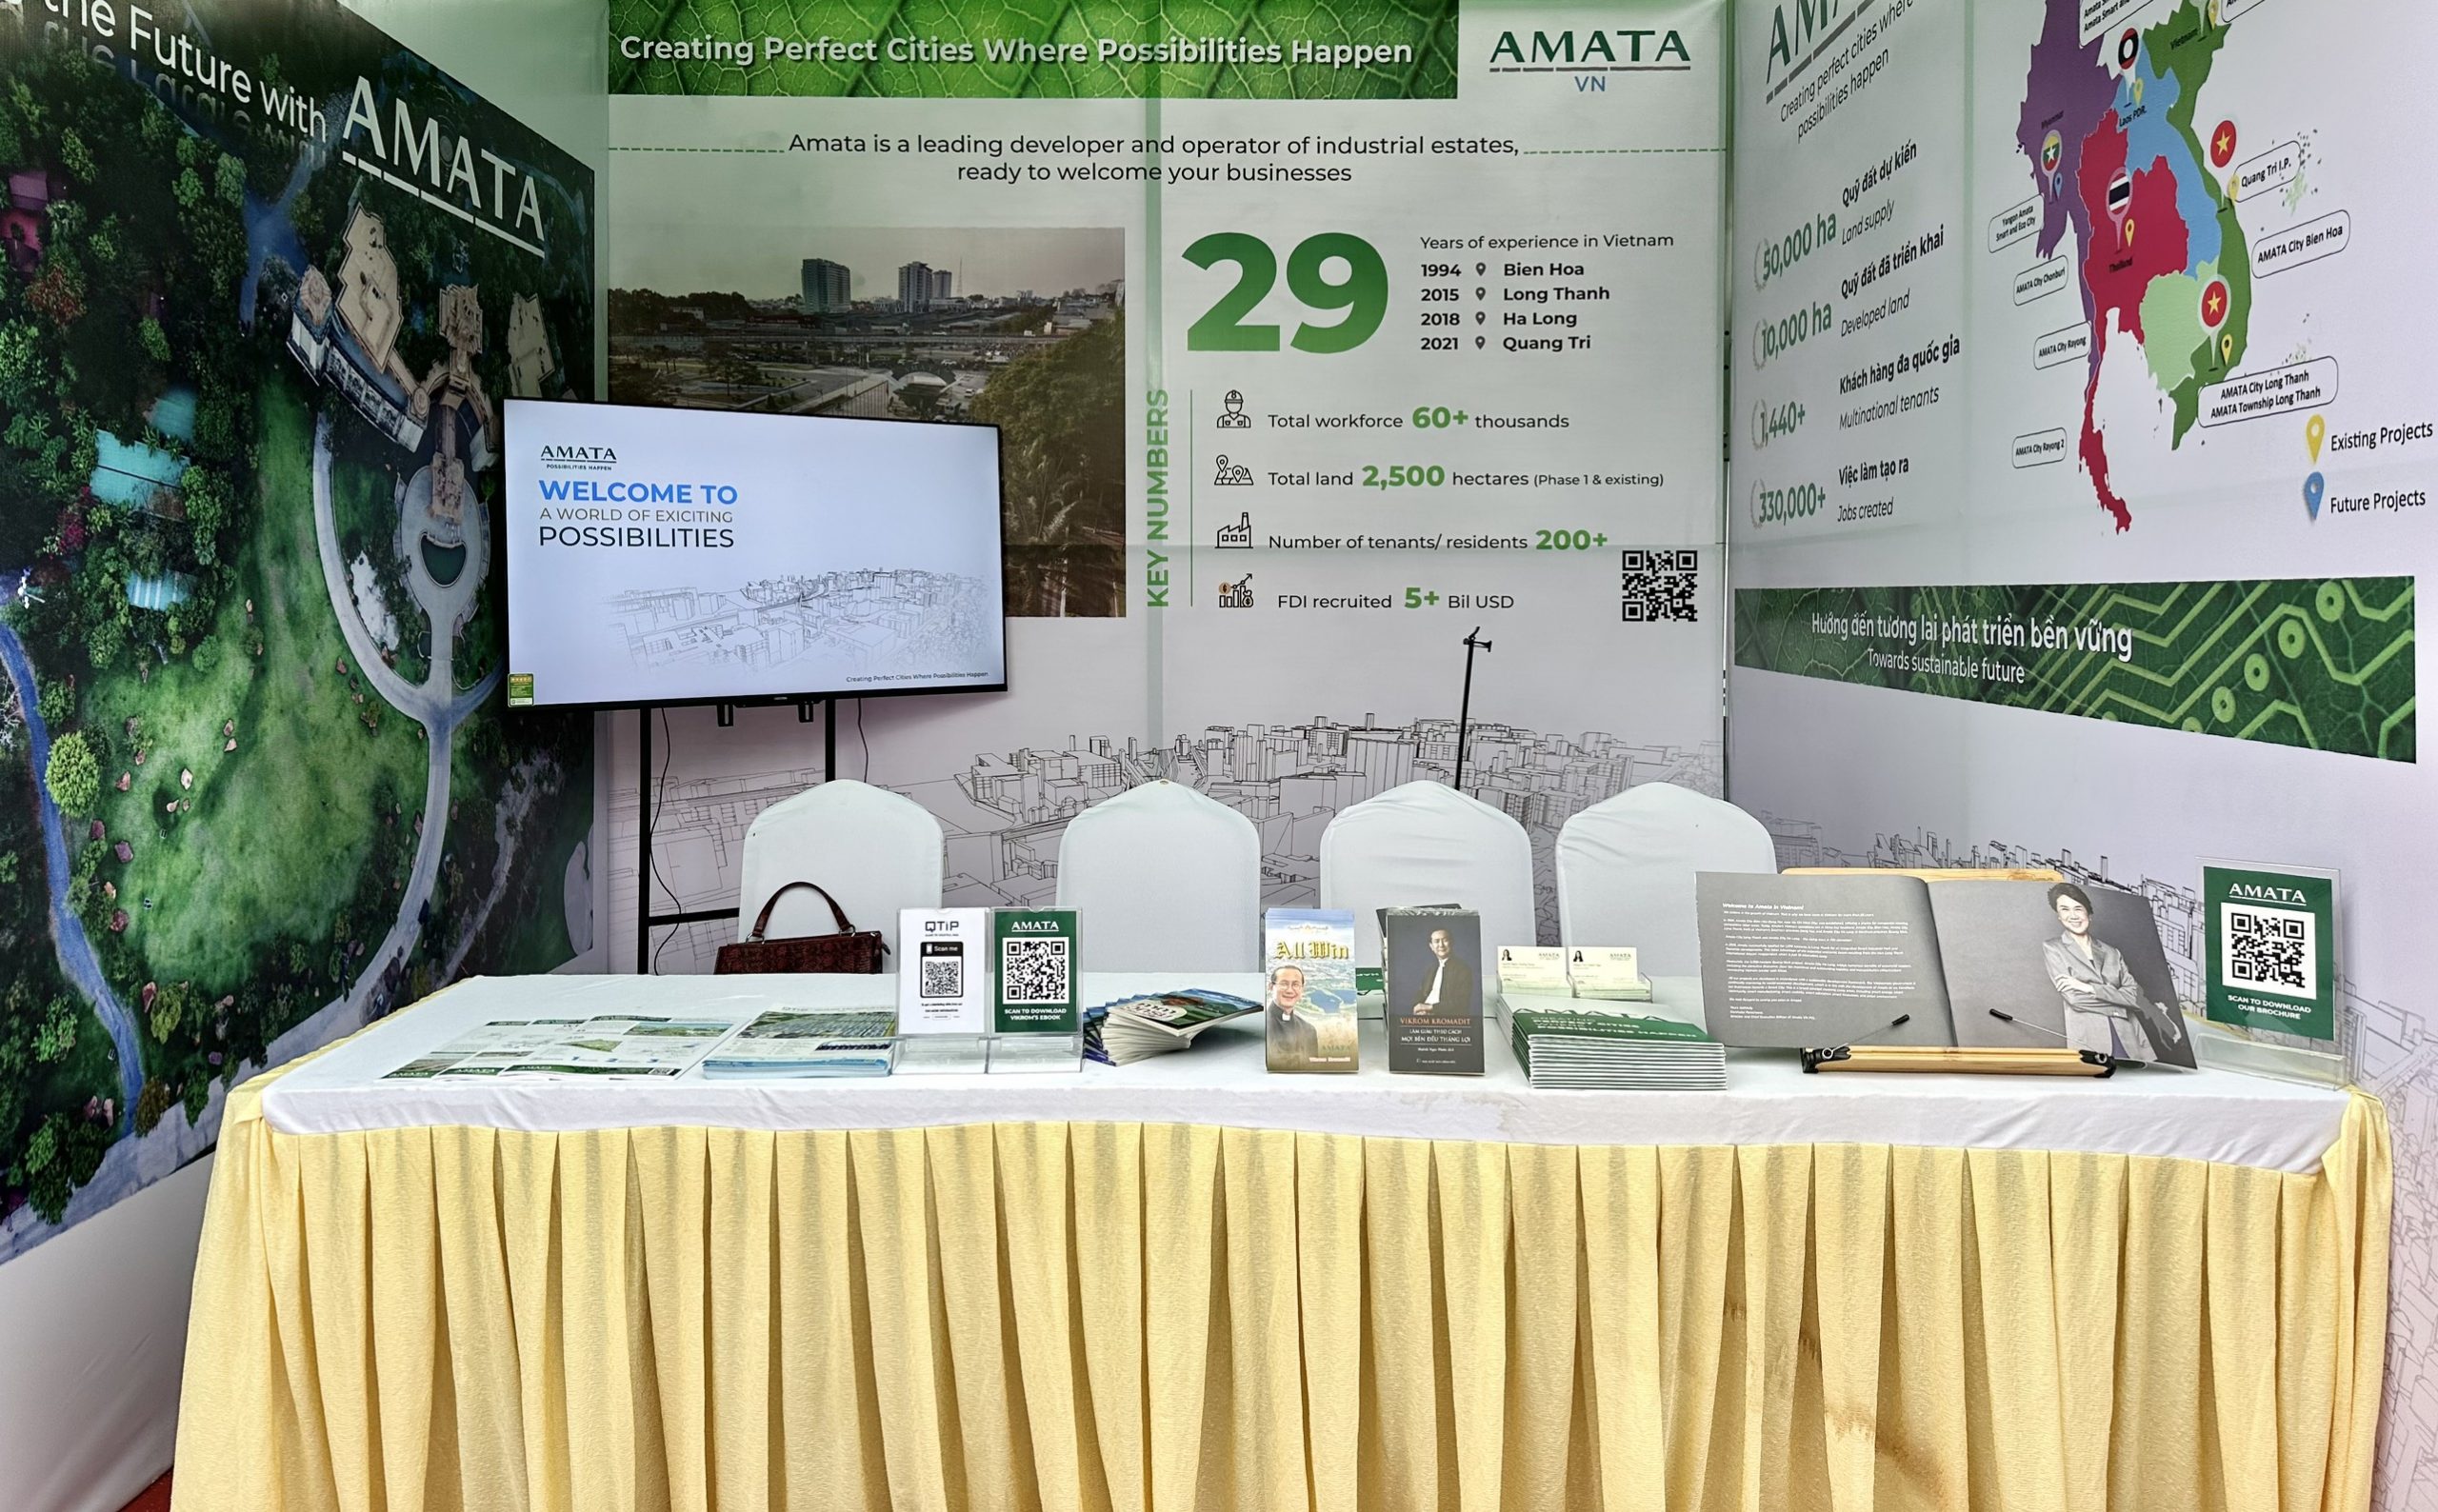 Advertising booth of Amata VN PCL